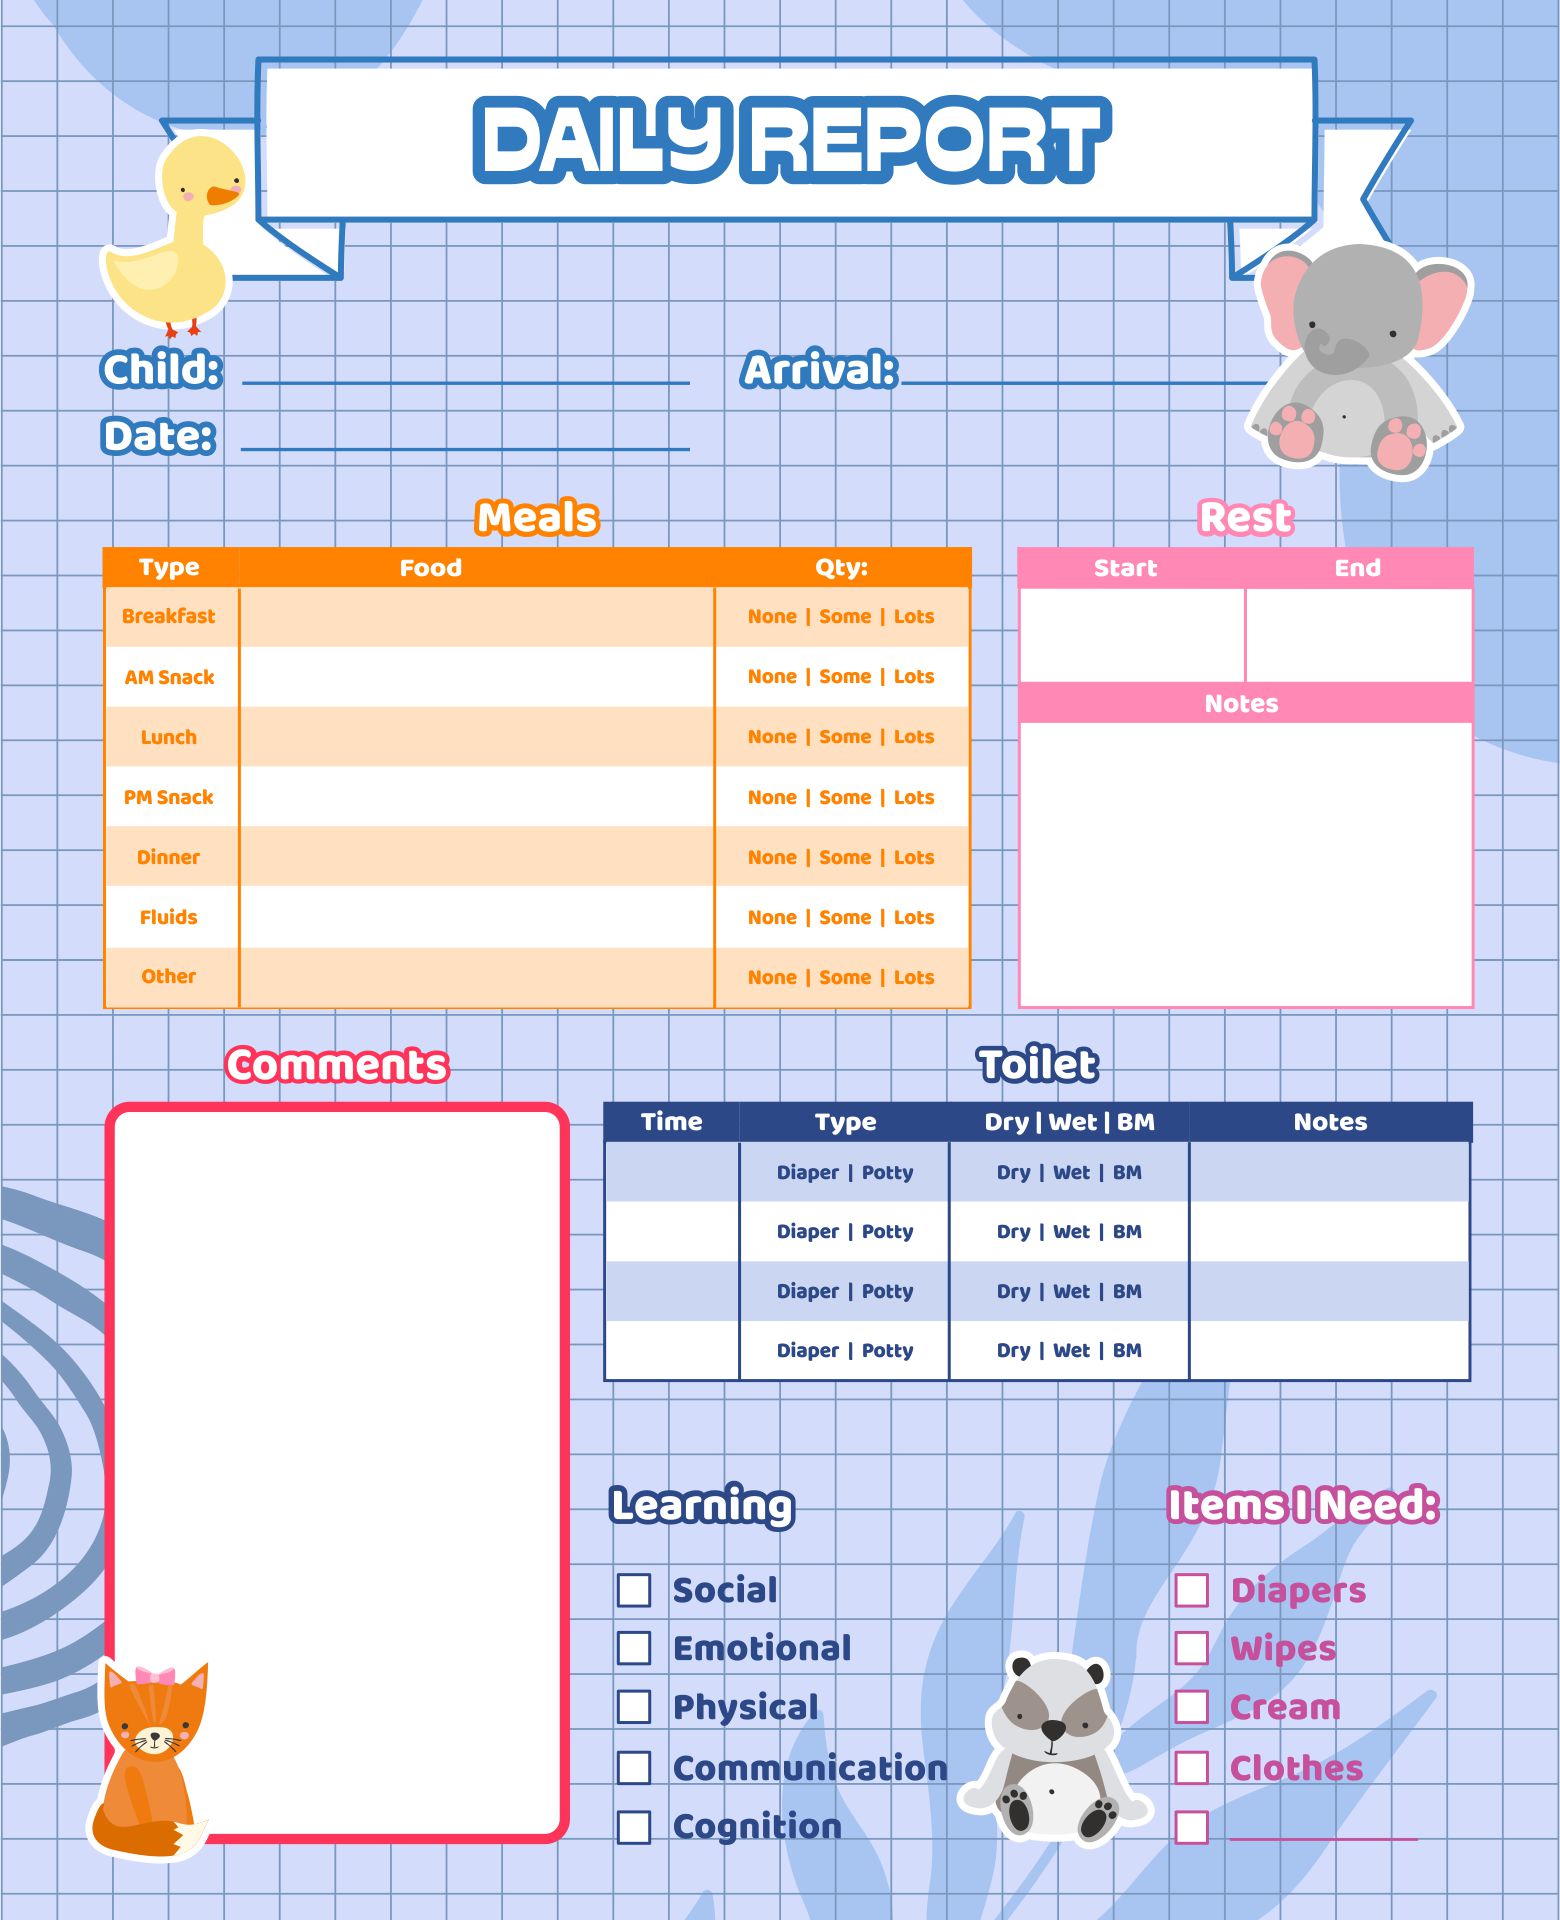 8-best-images-of-preschool-daily-reports-printable-printable-preschool-daily-report-sheets